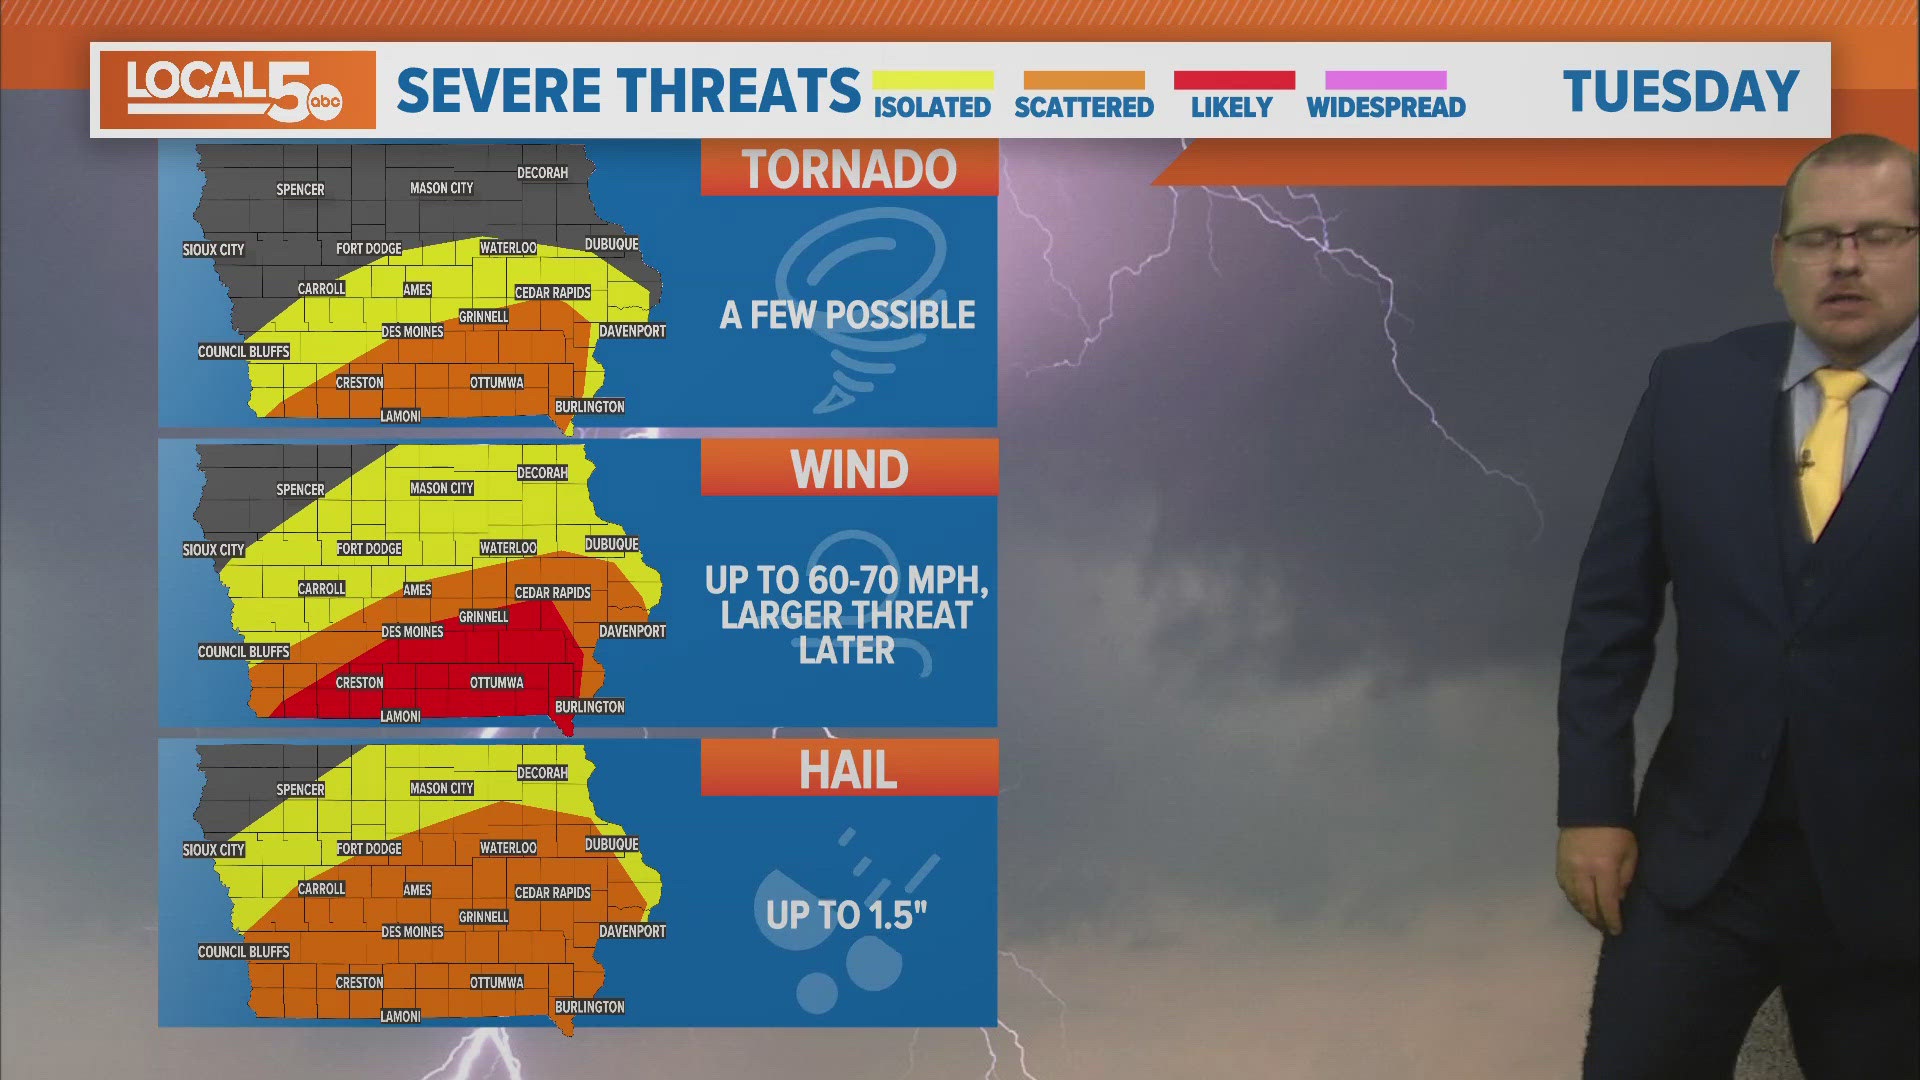 Tornadoes, hail and damaging wind threats with strongest storms